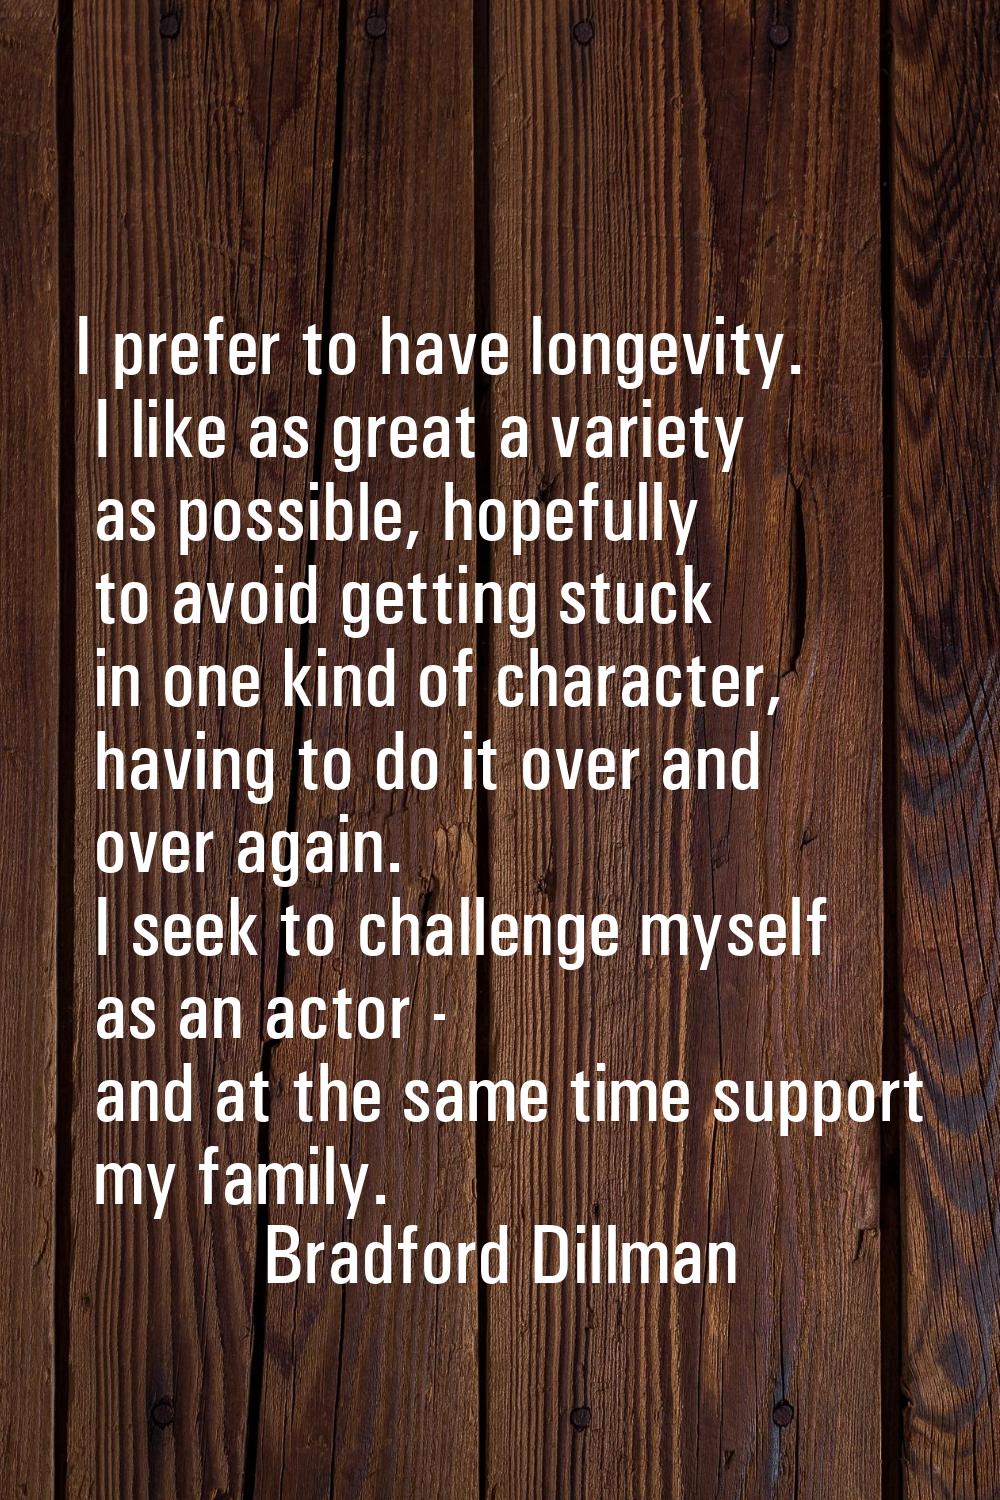 I prefer to have longevity. I like as great a variety as possible, hopefully to avoid getting stuck